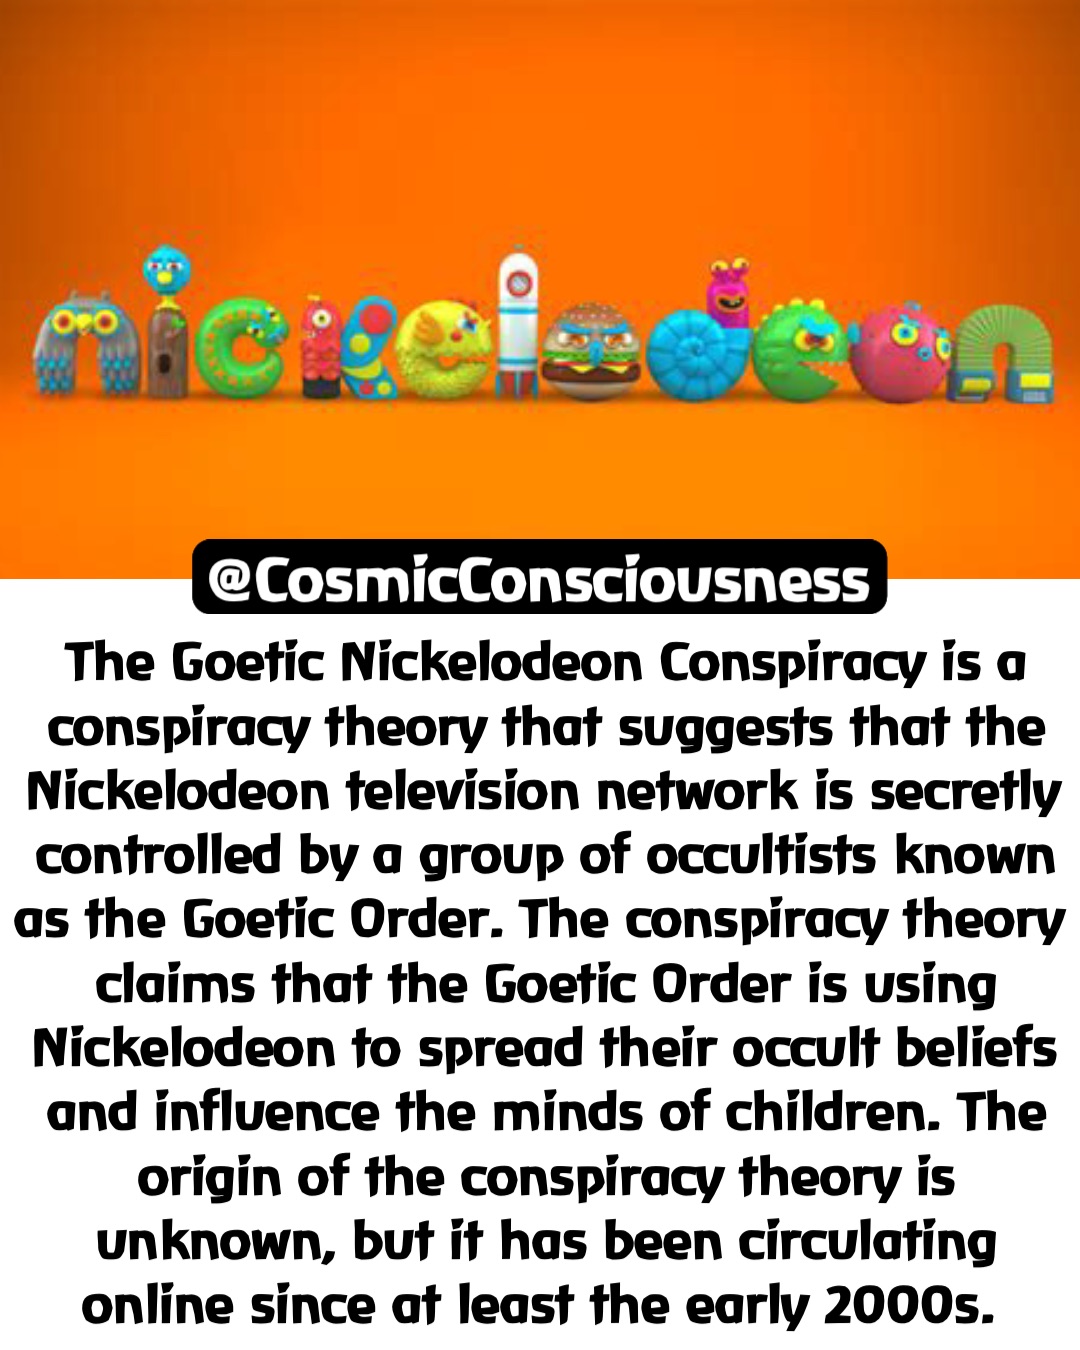 The Goetic Nickelodeon Conspiracy is a conspiracy theory that suggests that the Nickelodeon television network is secretly controlled by a group of occultists known as the Goetic Order. The conspiracy theory claims that the Goetic Order is using Nickelodeon to spread their occult beliefs and influence the minds of children. The origin of the conspiracy theory is unknown, but it has been circulating online since at least the early 2000s. @CosmicConsciousness